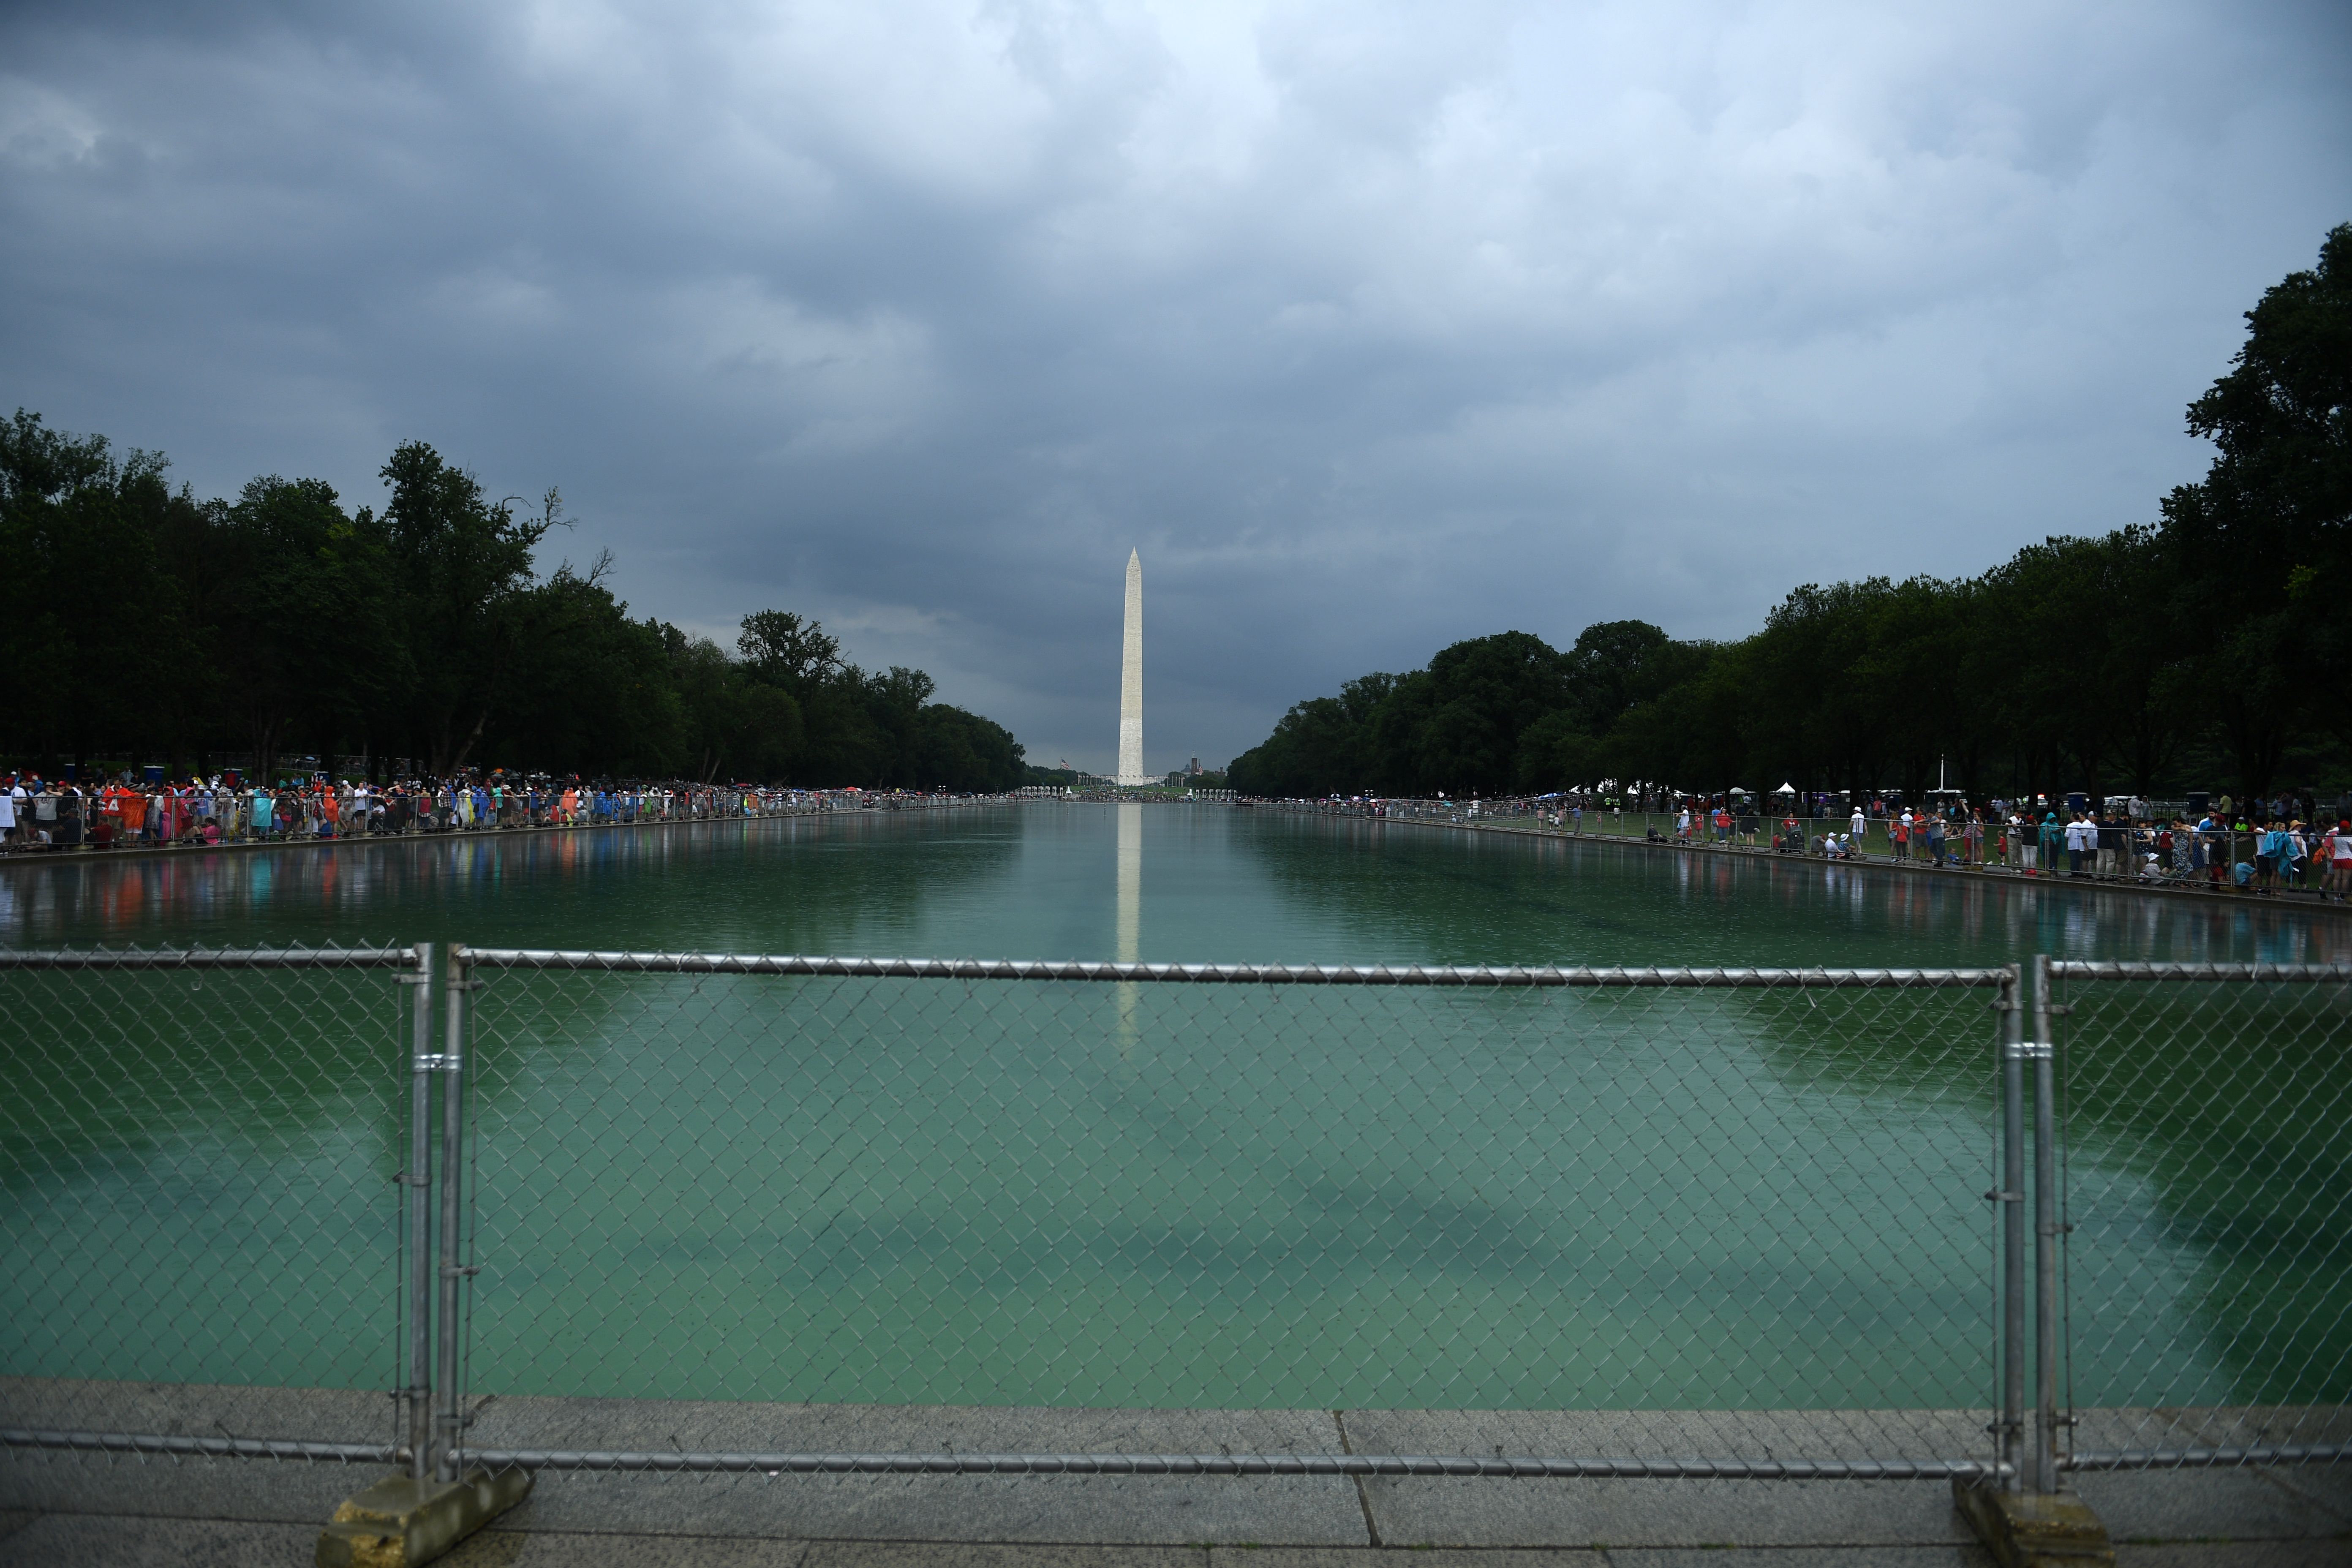 People gather under rain on the National Mall ahead of the "Salute to America" event at the Lincoln Memorial in Washington, DC, on July 4, 2019.